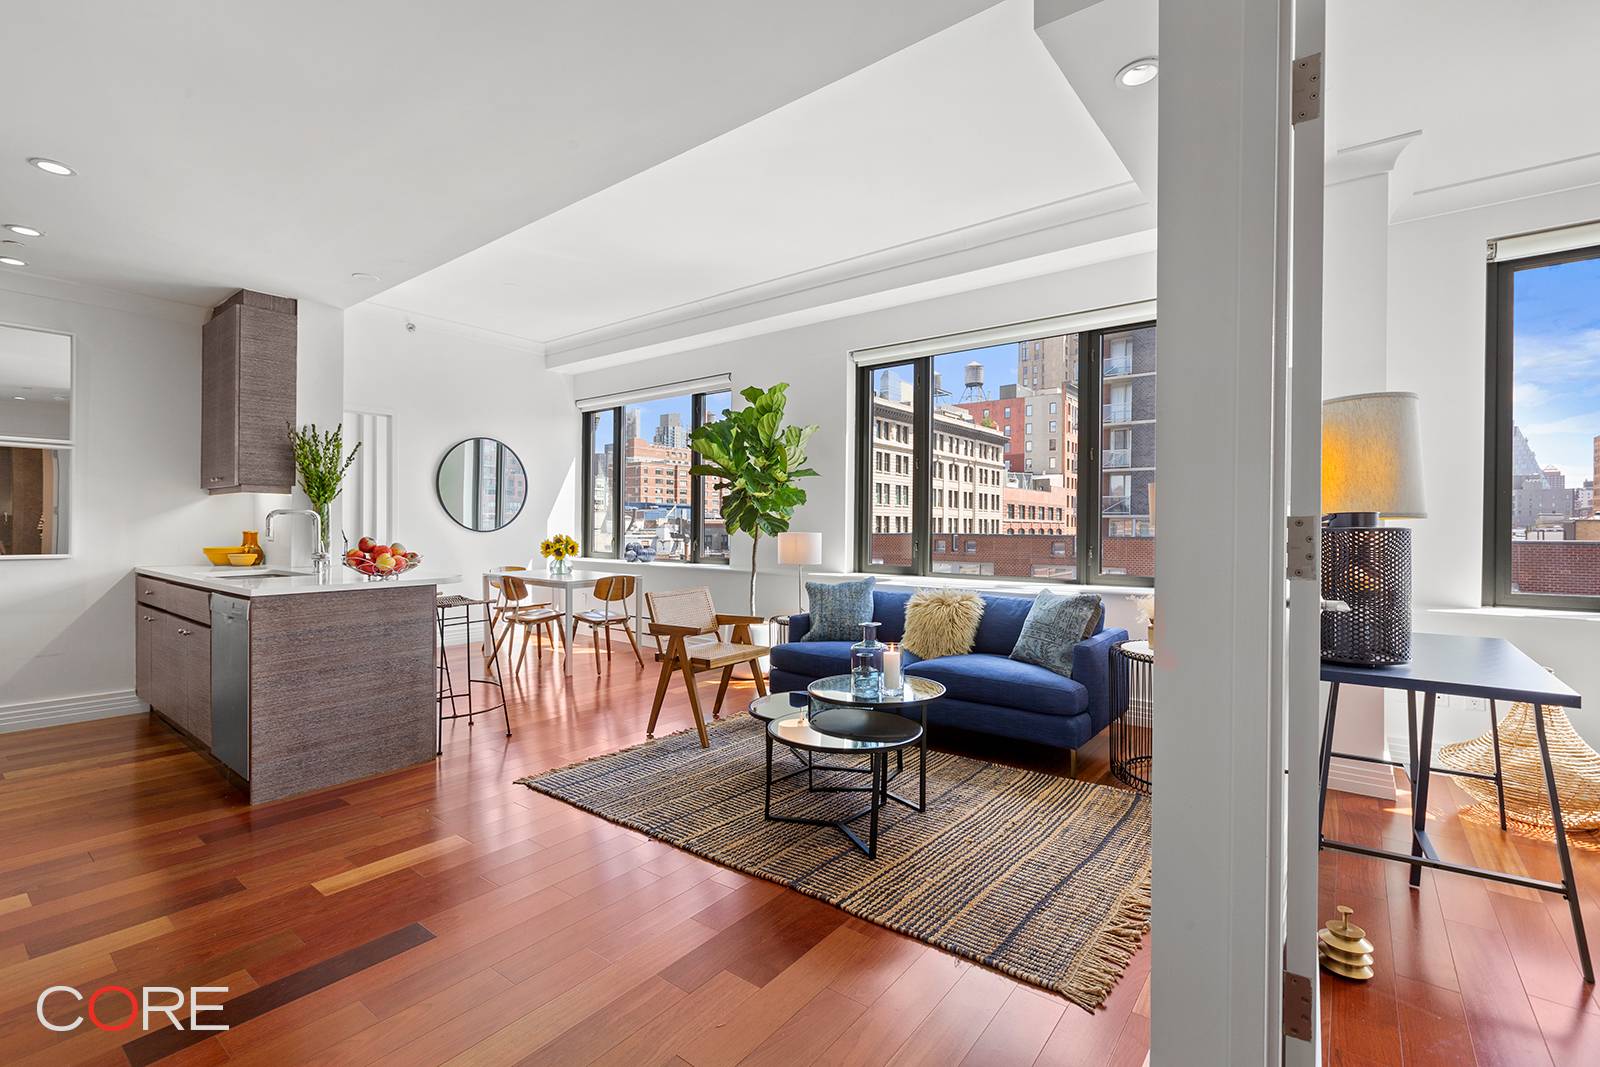 Rare opportunity to combine two penthouse units at 305W16 a 2, 449 interior square feet 1, 024 SF of private roof garden !